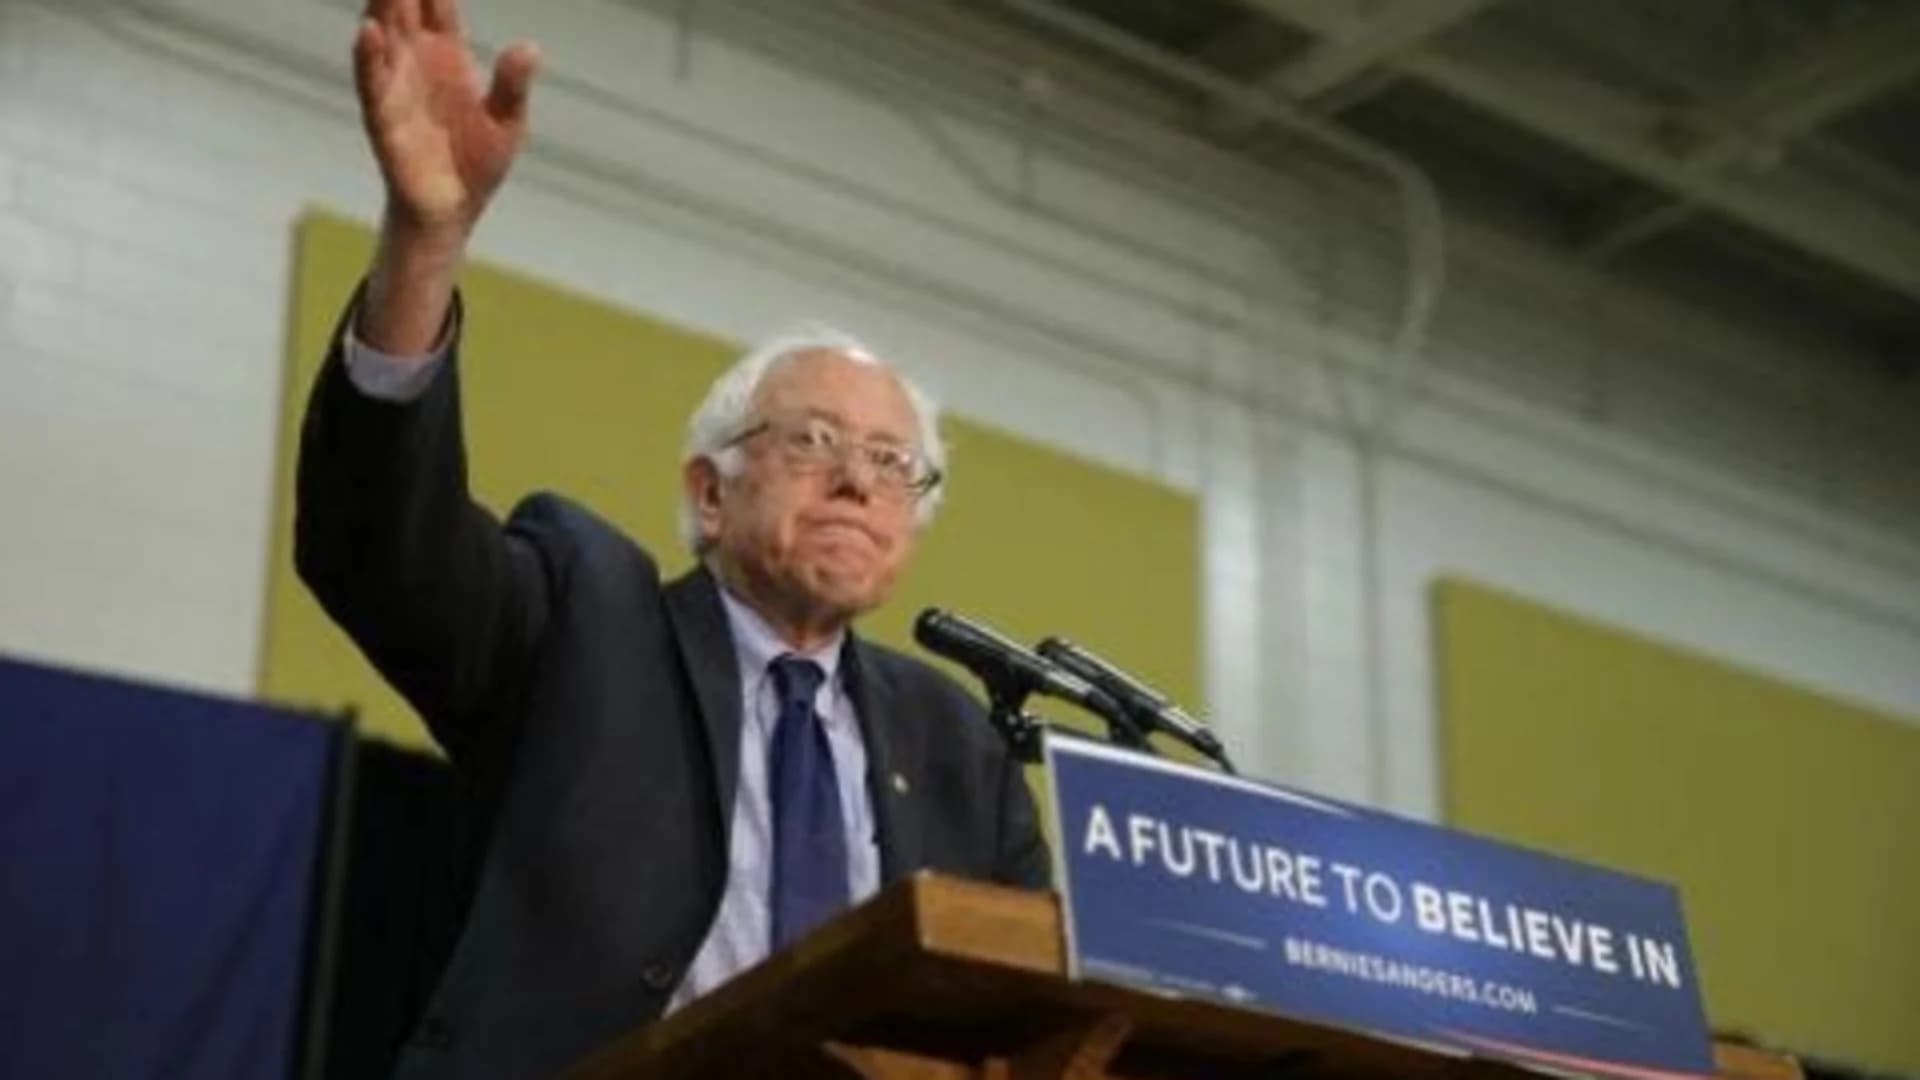 Sanders returns to NY roots, says he can defeat Trump